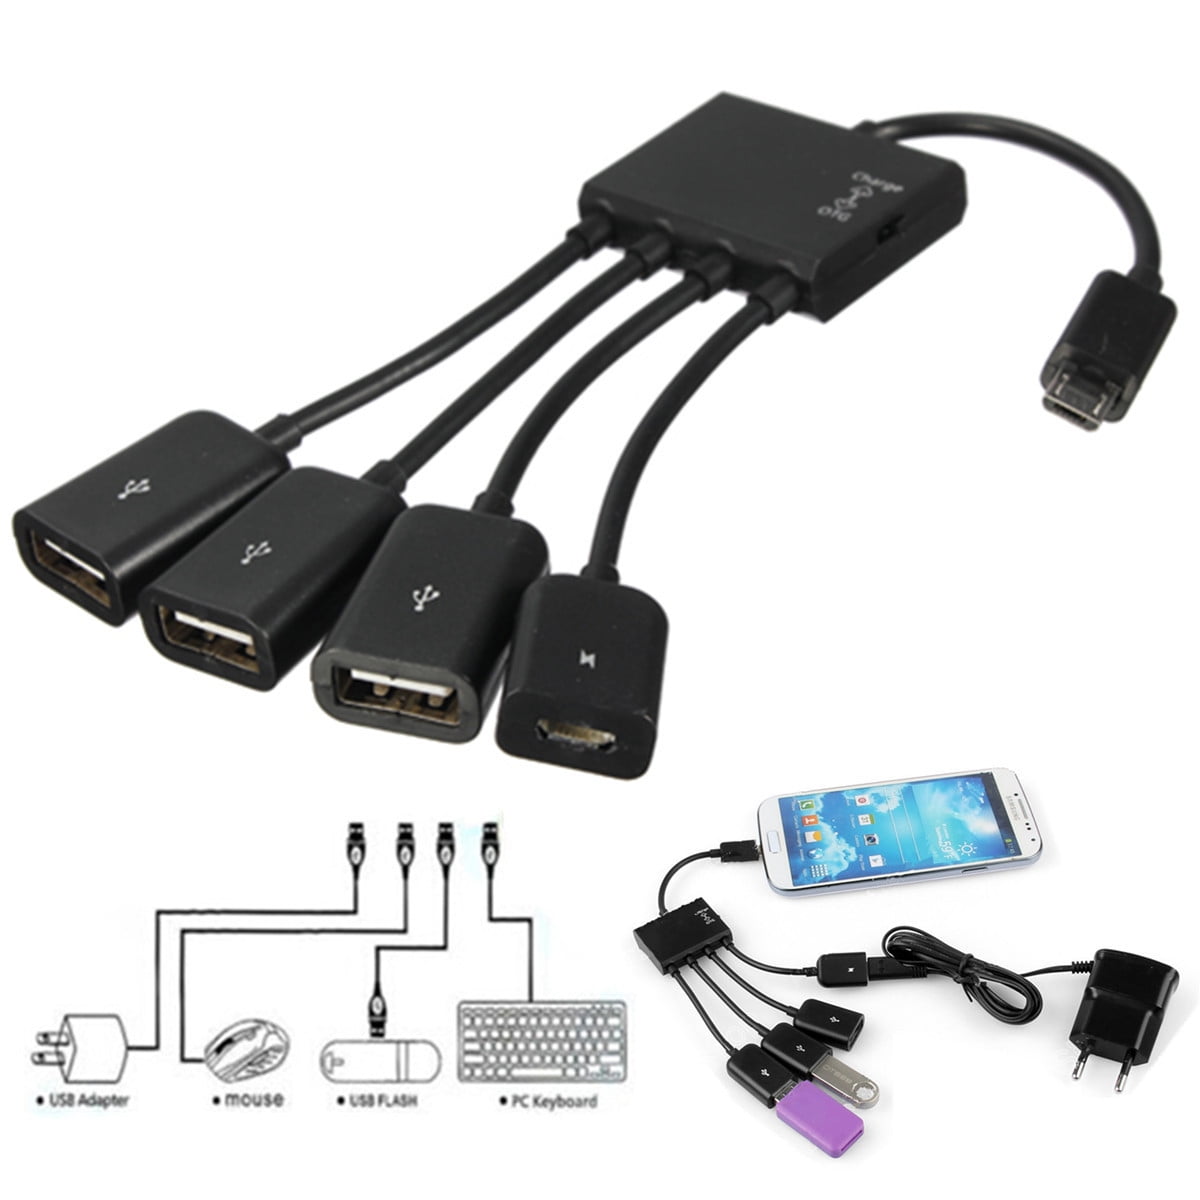 Tek Styz PRO OTG Power Cable Works for Samsung ATIV Q with Power Connect Any Compatible USB Accessory with MicroUSB Cable!